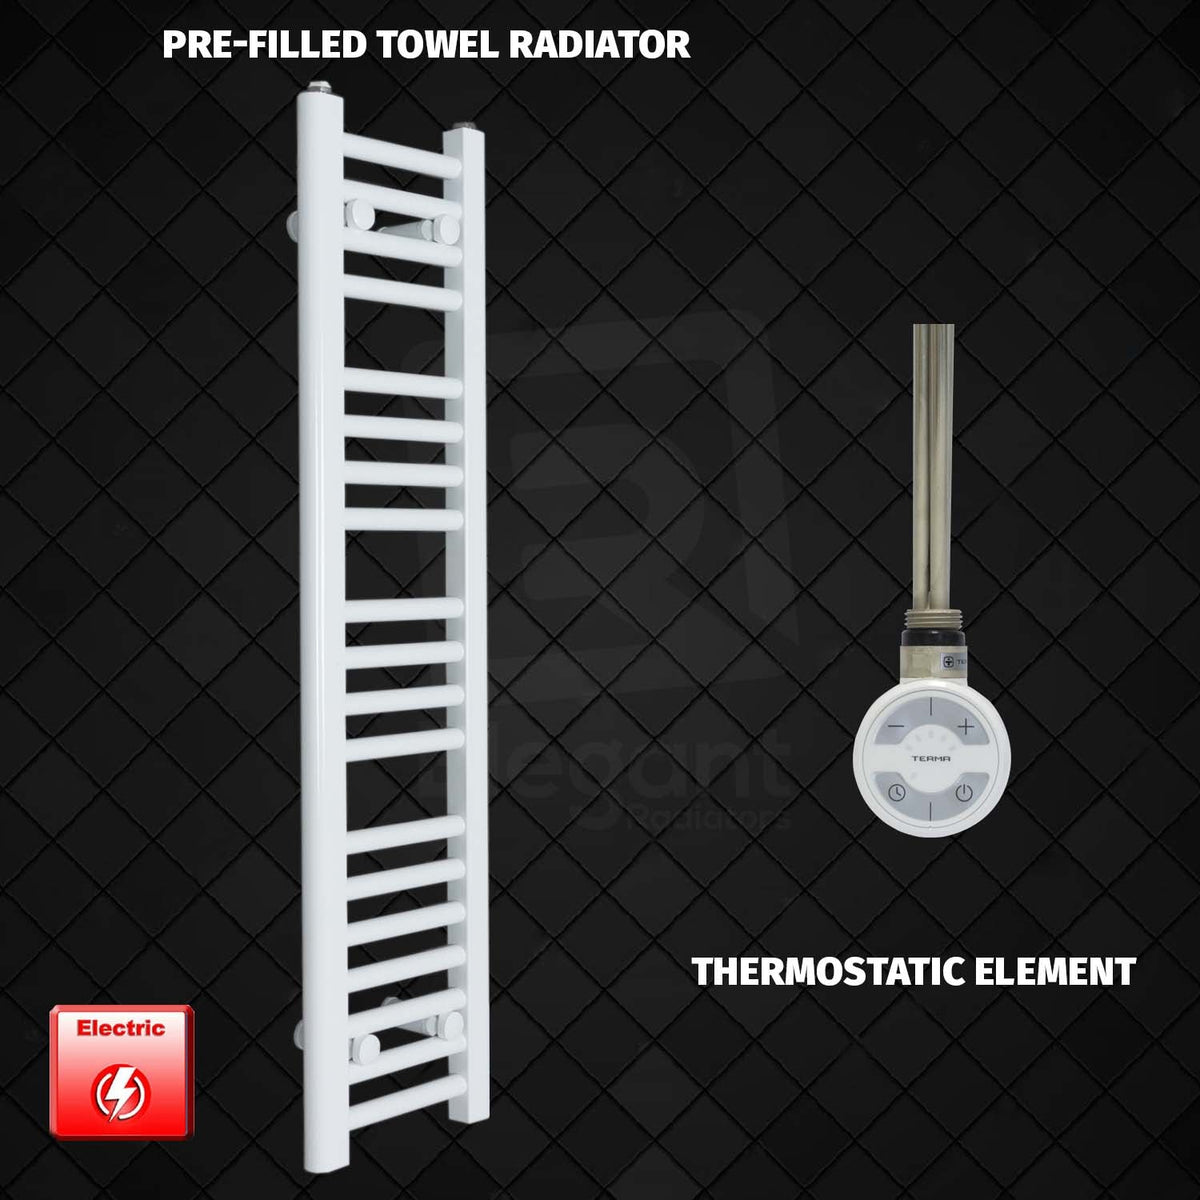 1000 x 250 Pre-Filled Electric Heated Towel Radiator White HTR MOA Thermostatic Element